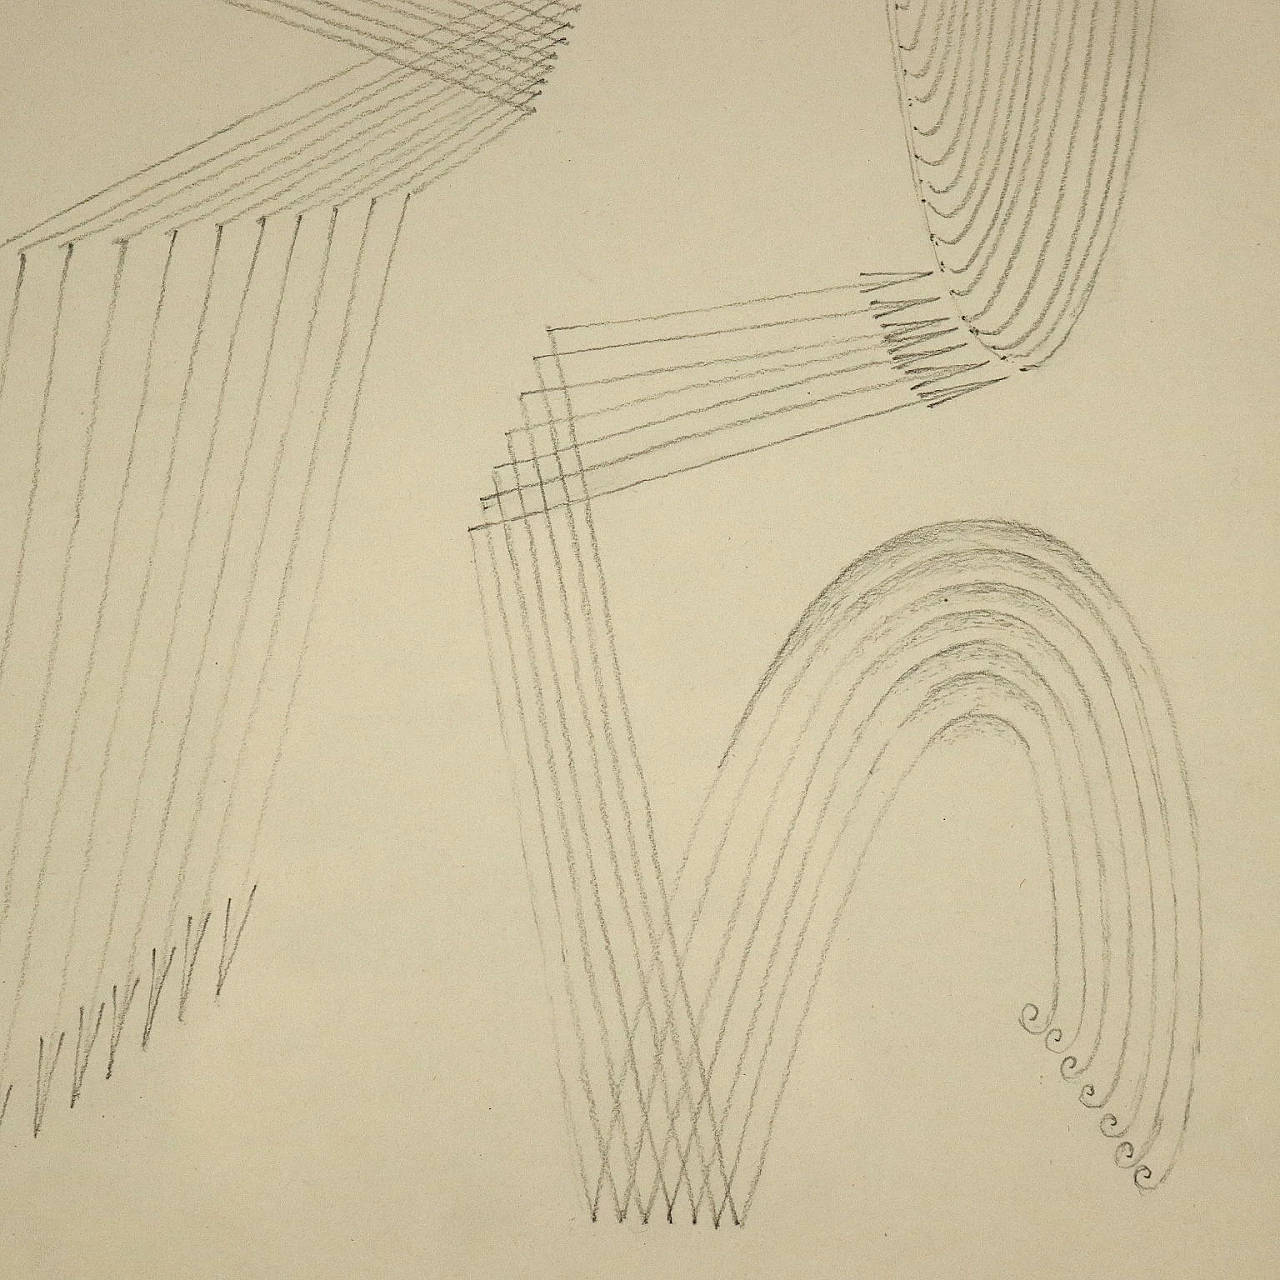 Fausto Melotti, abstract subject, pencil on paper, 1972 3